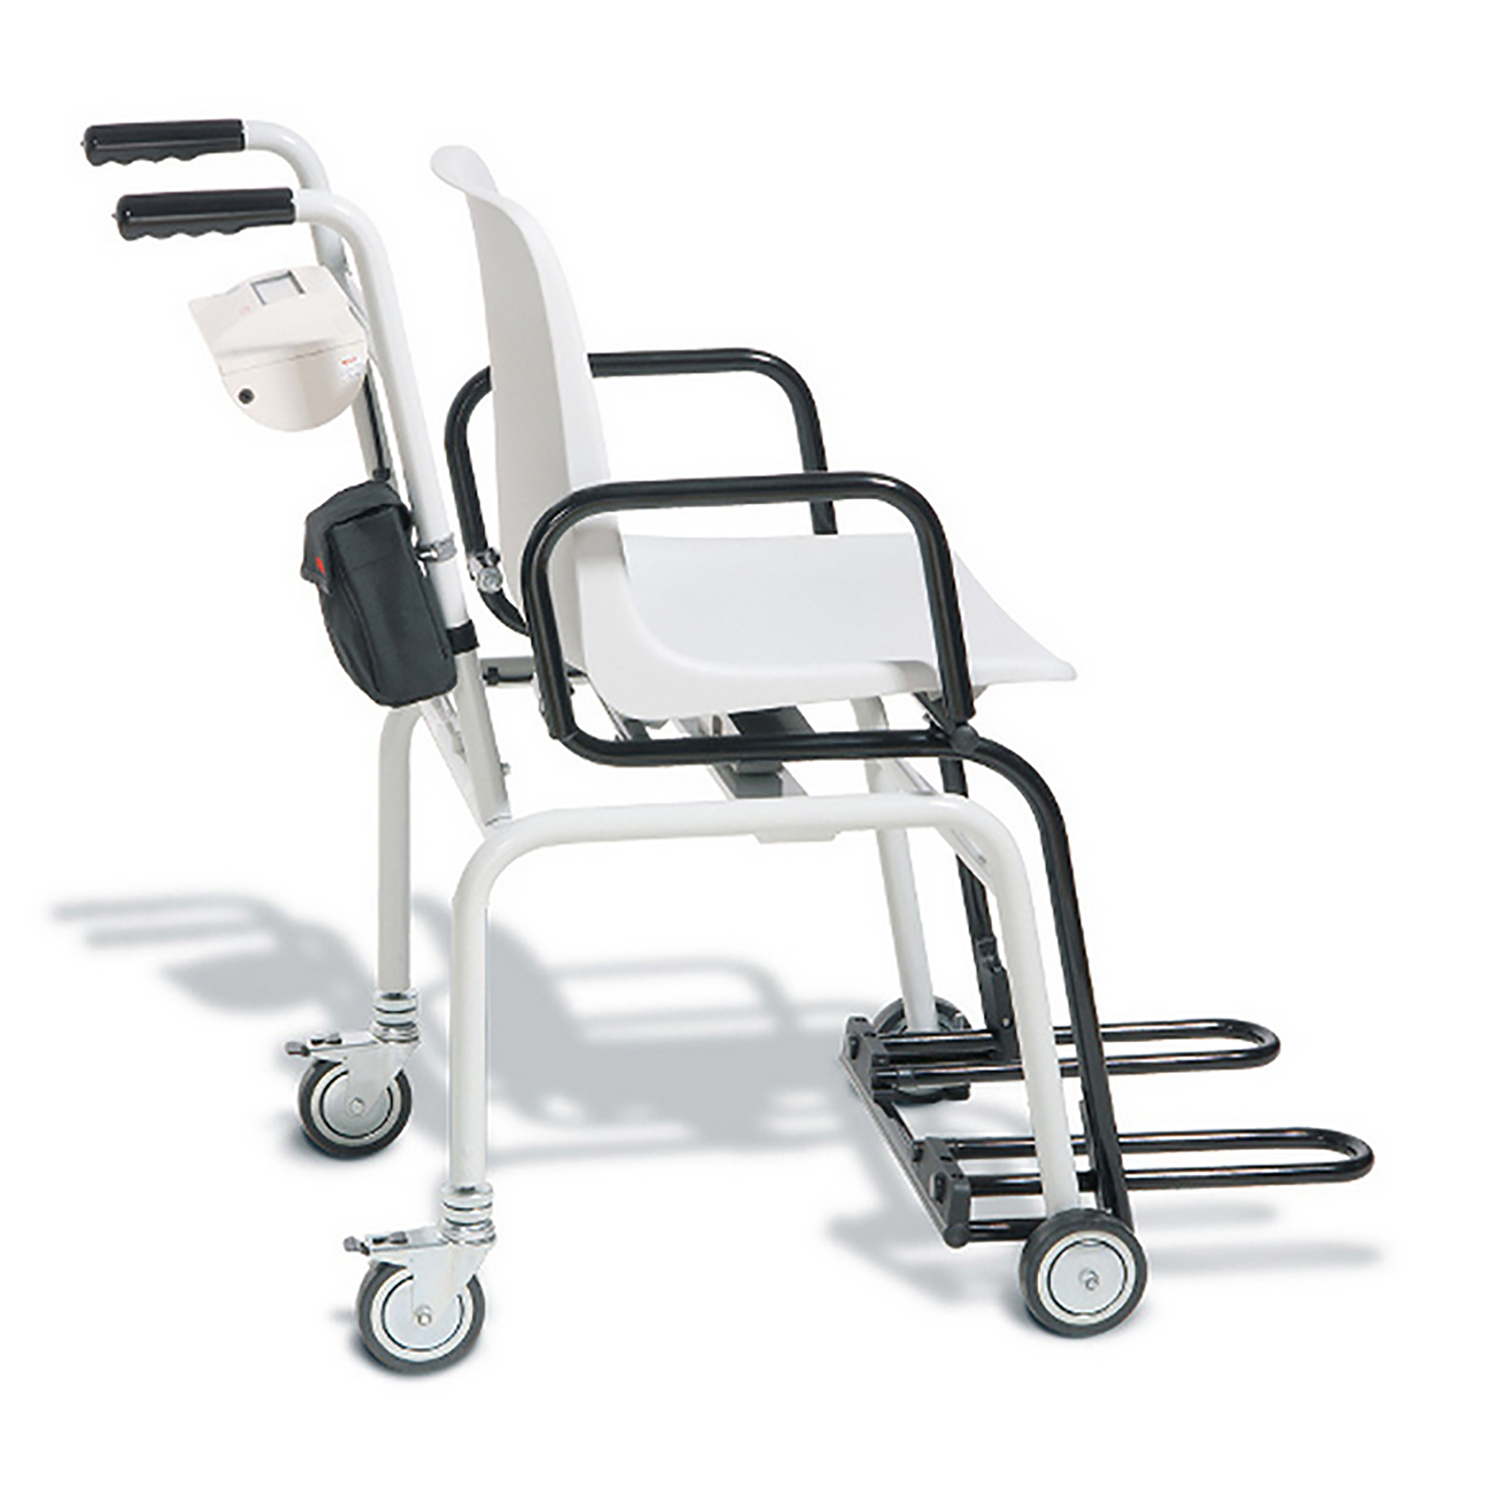 seca 959r Class III Digital High Capacity Chair Scale with fold up arm & footrests, BMI. RS232 interface (1)